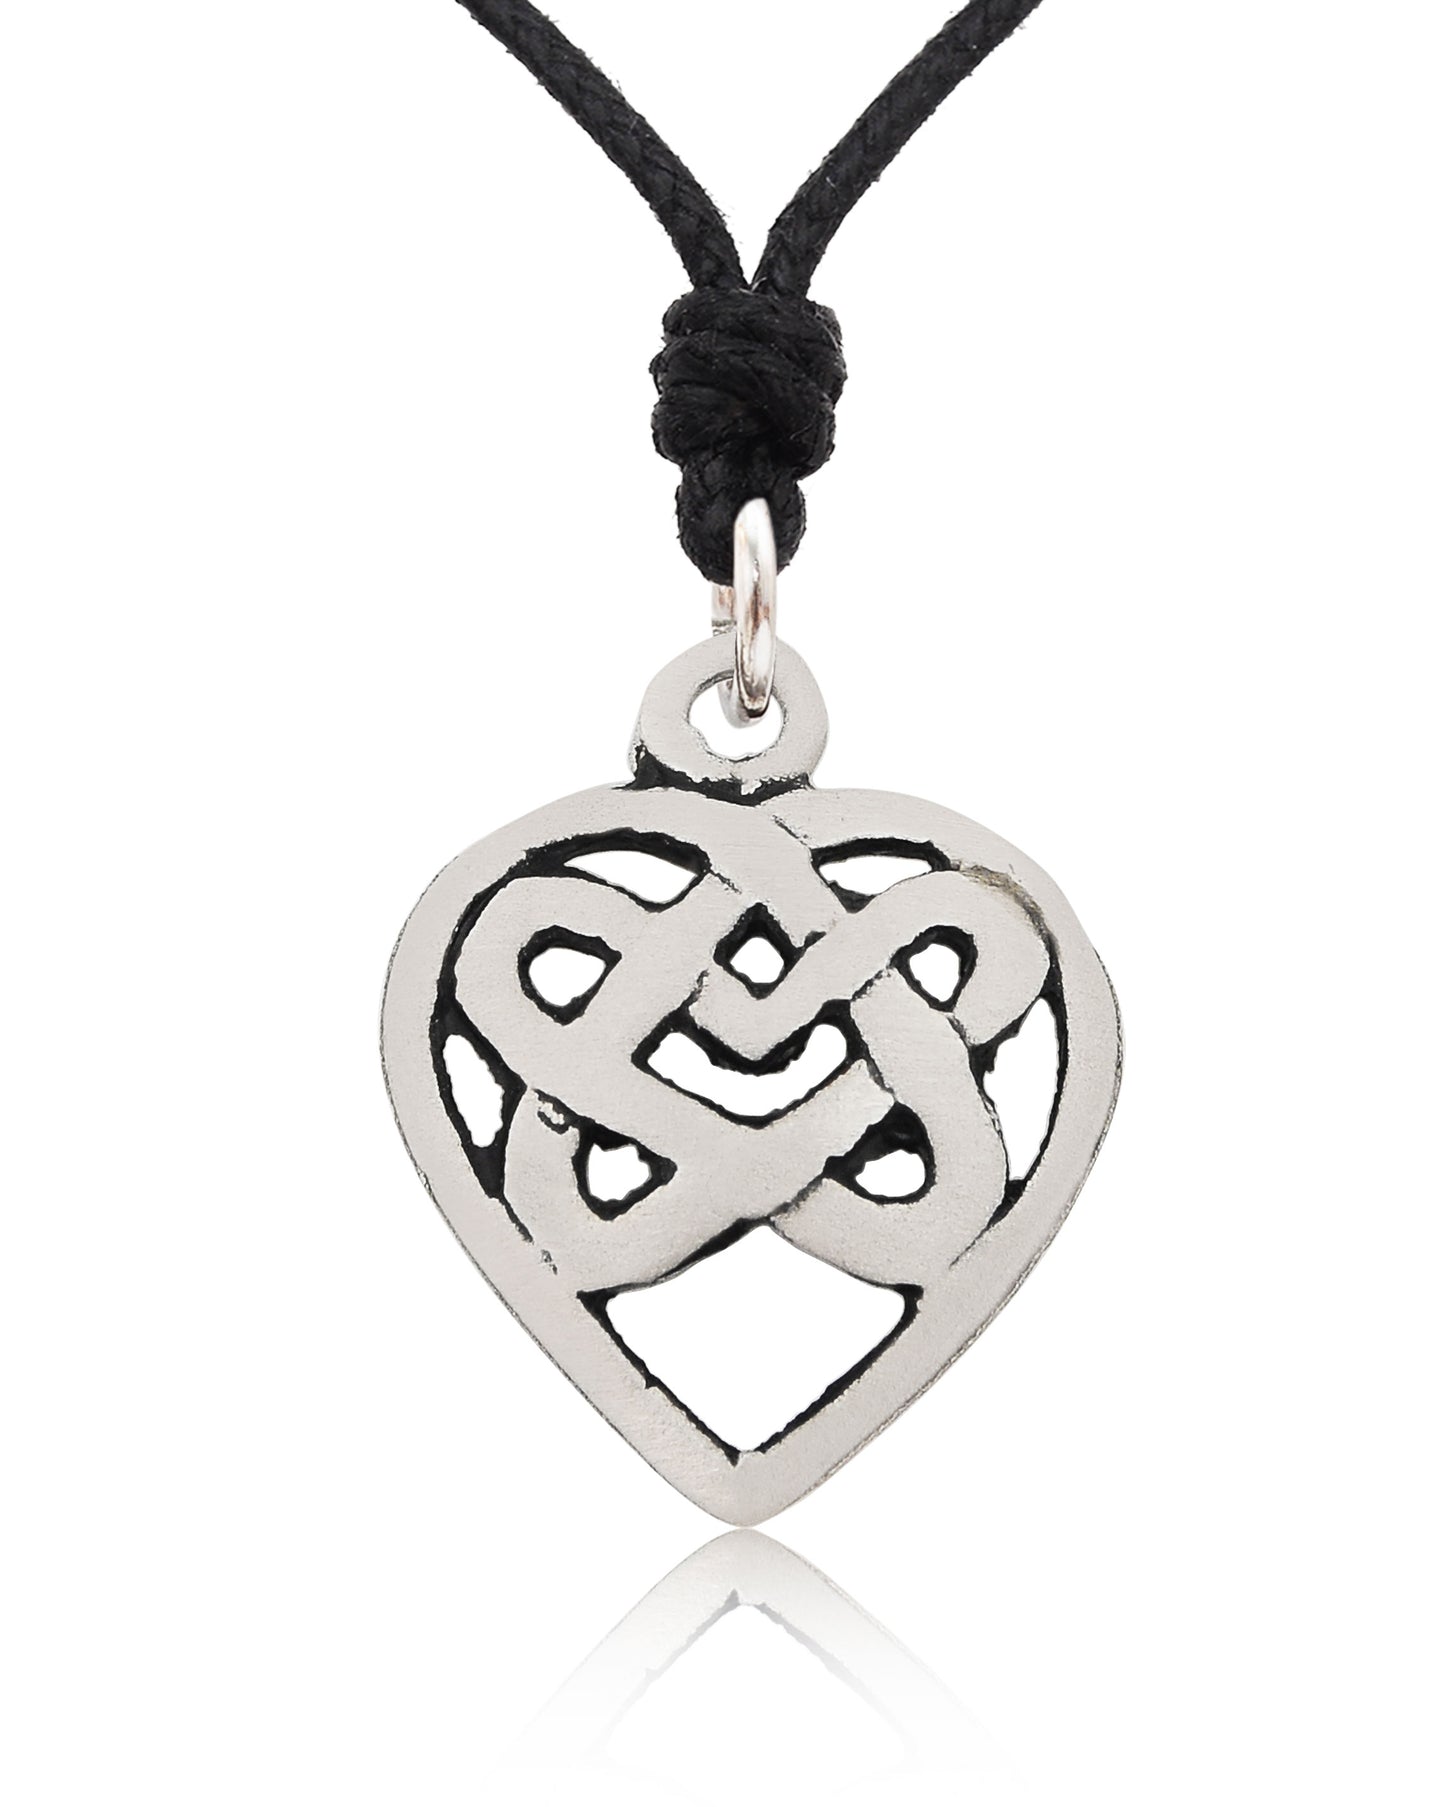 Handmade Celtic Heart Knot Silver Pewter Silver Charm Necklace Pendant Jewelry